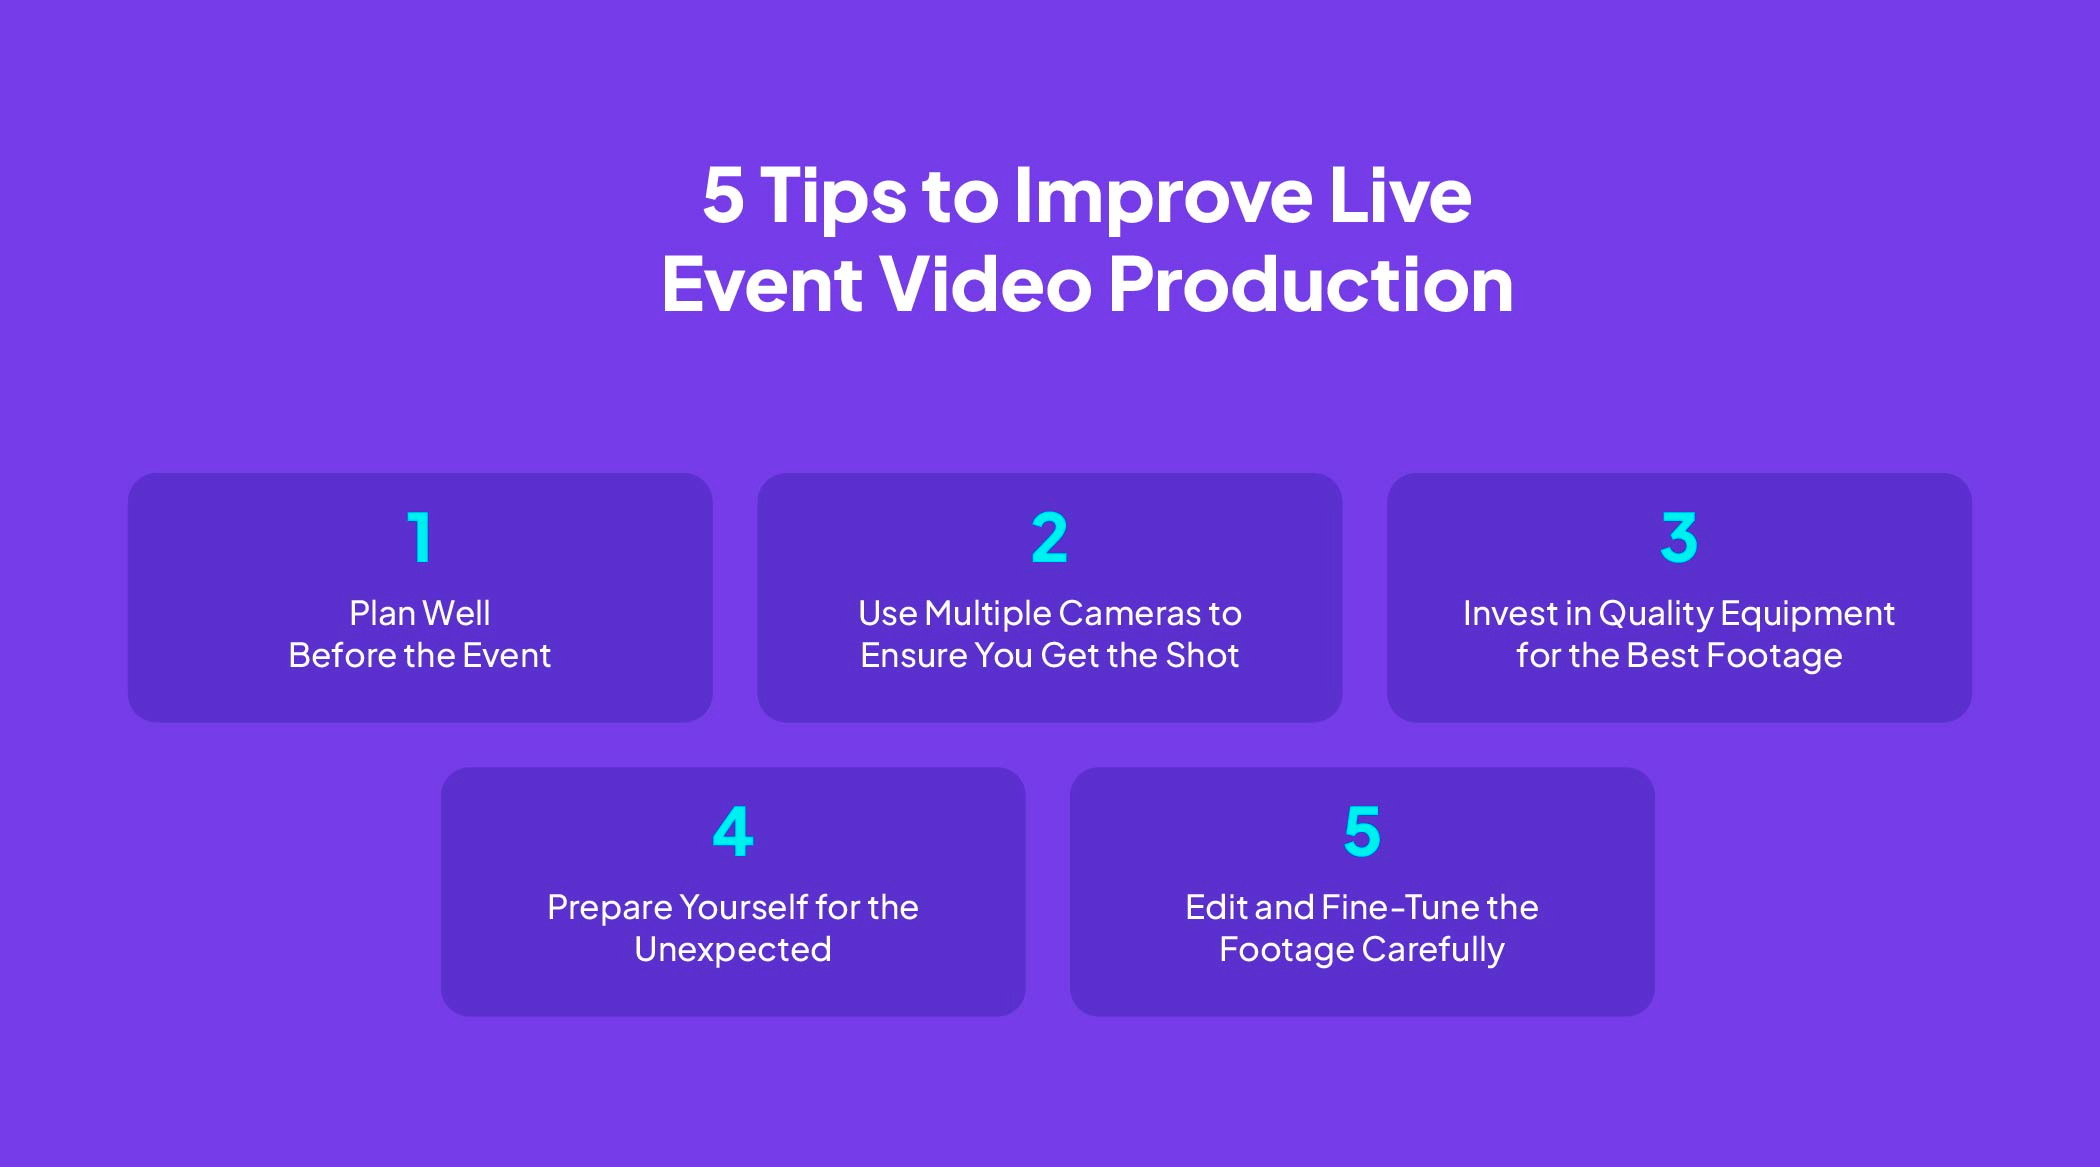 tips to improve your live event video production process, live streams, and editing process